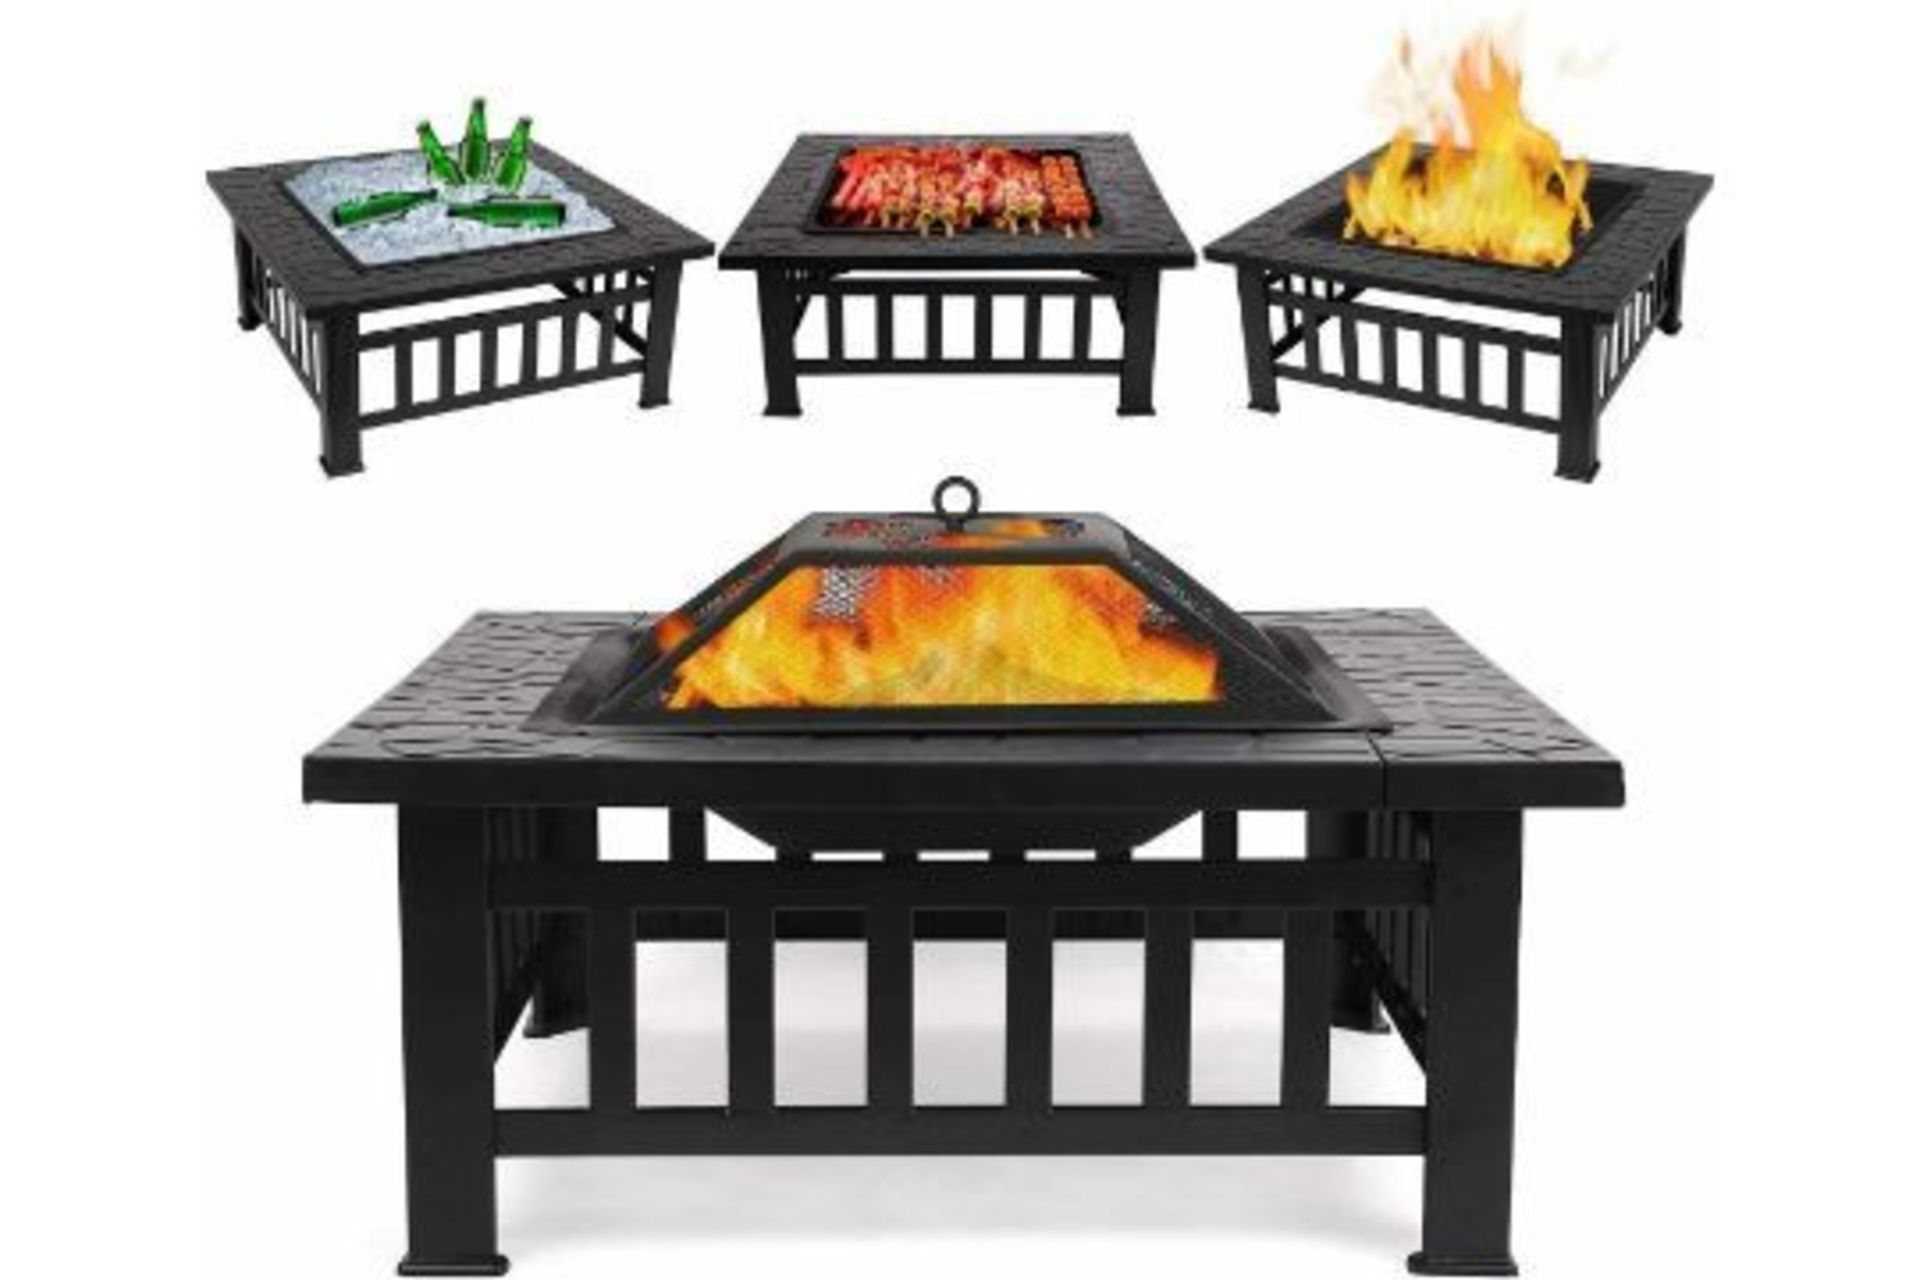 New Boxed Outdoor 3 in 1 BBQ, Large Firepit, Ice Bucket Garden Square Table. RRP £249.99. Planning